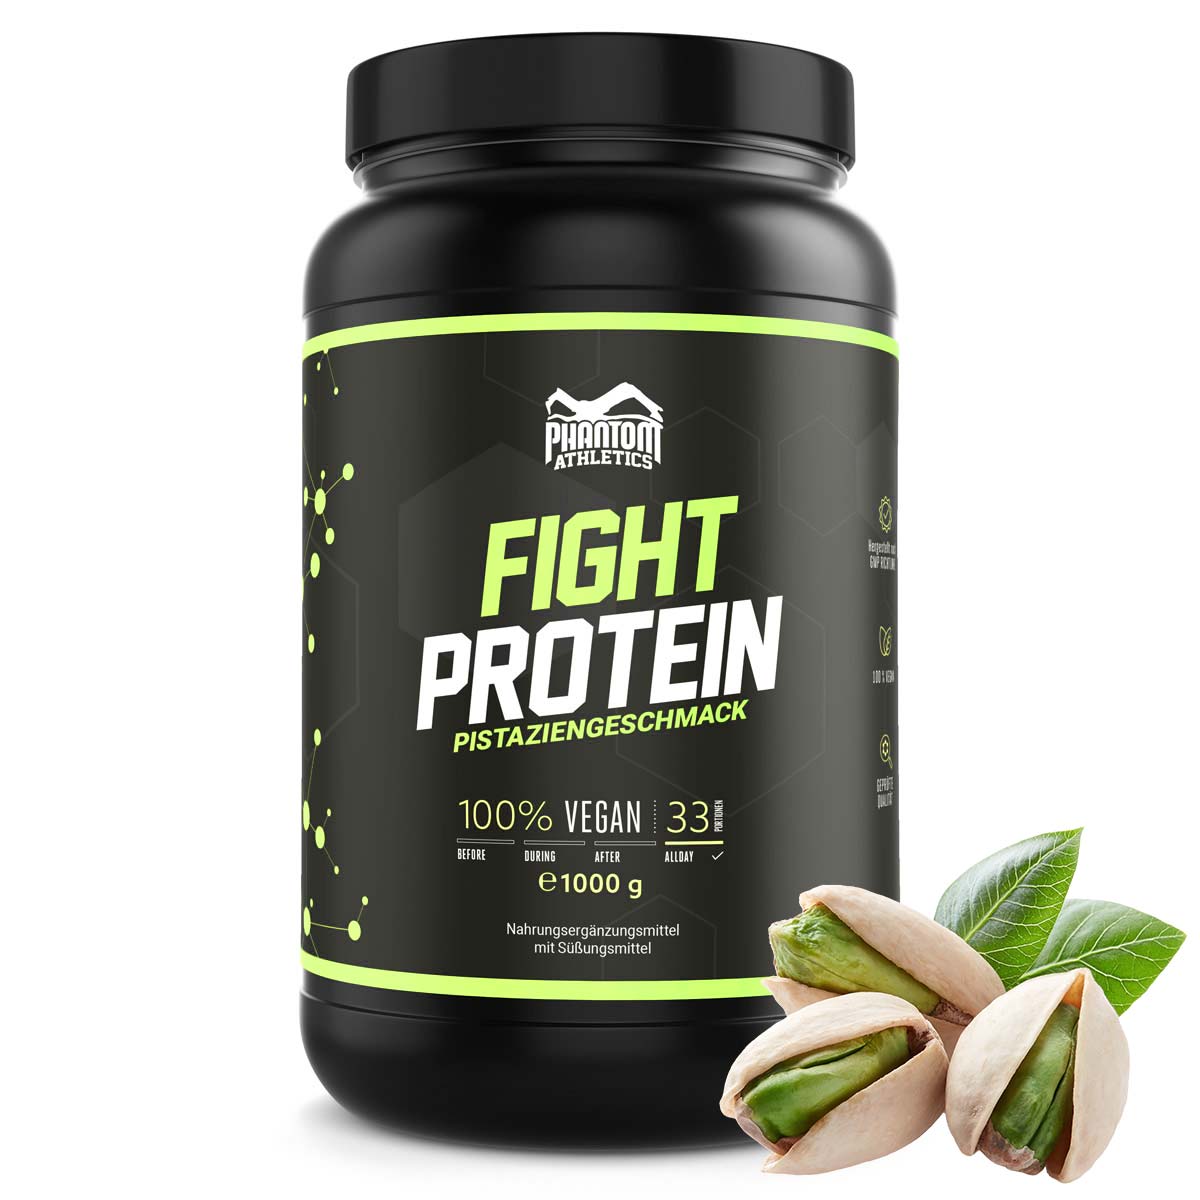 Phantom FIGHT protein for martial artists with pistachio flavor